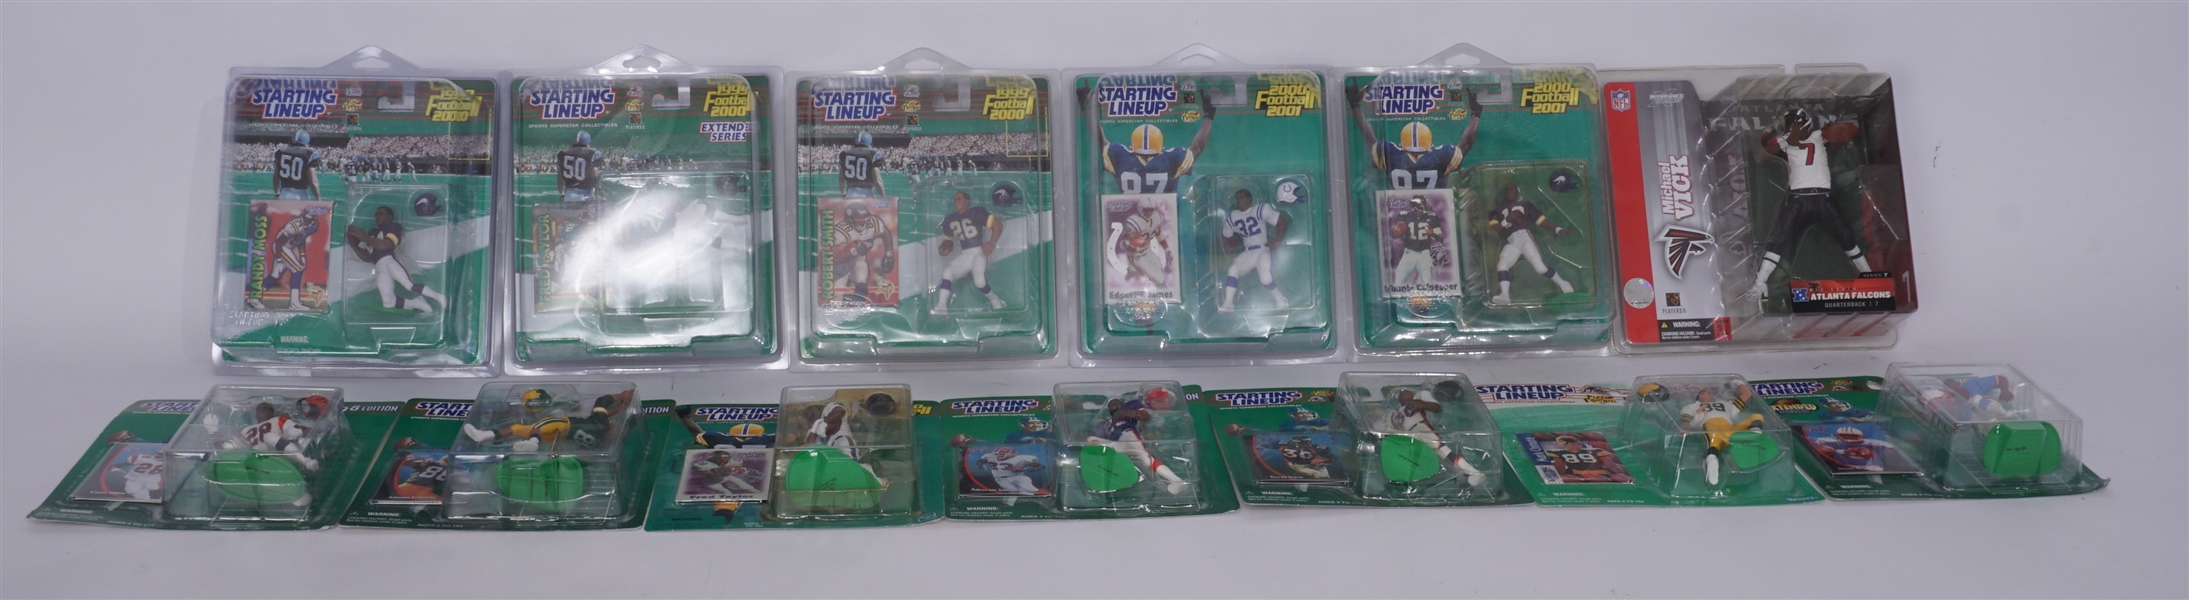 Lot of 13 NFL Starting Lineup Figures